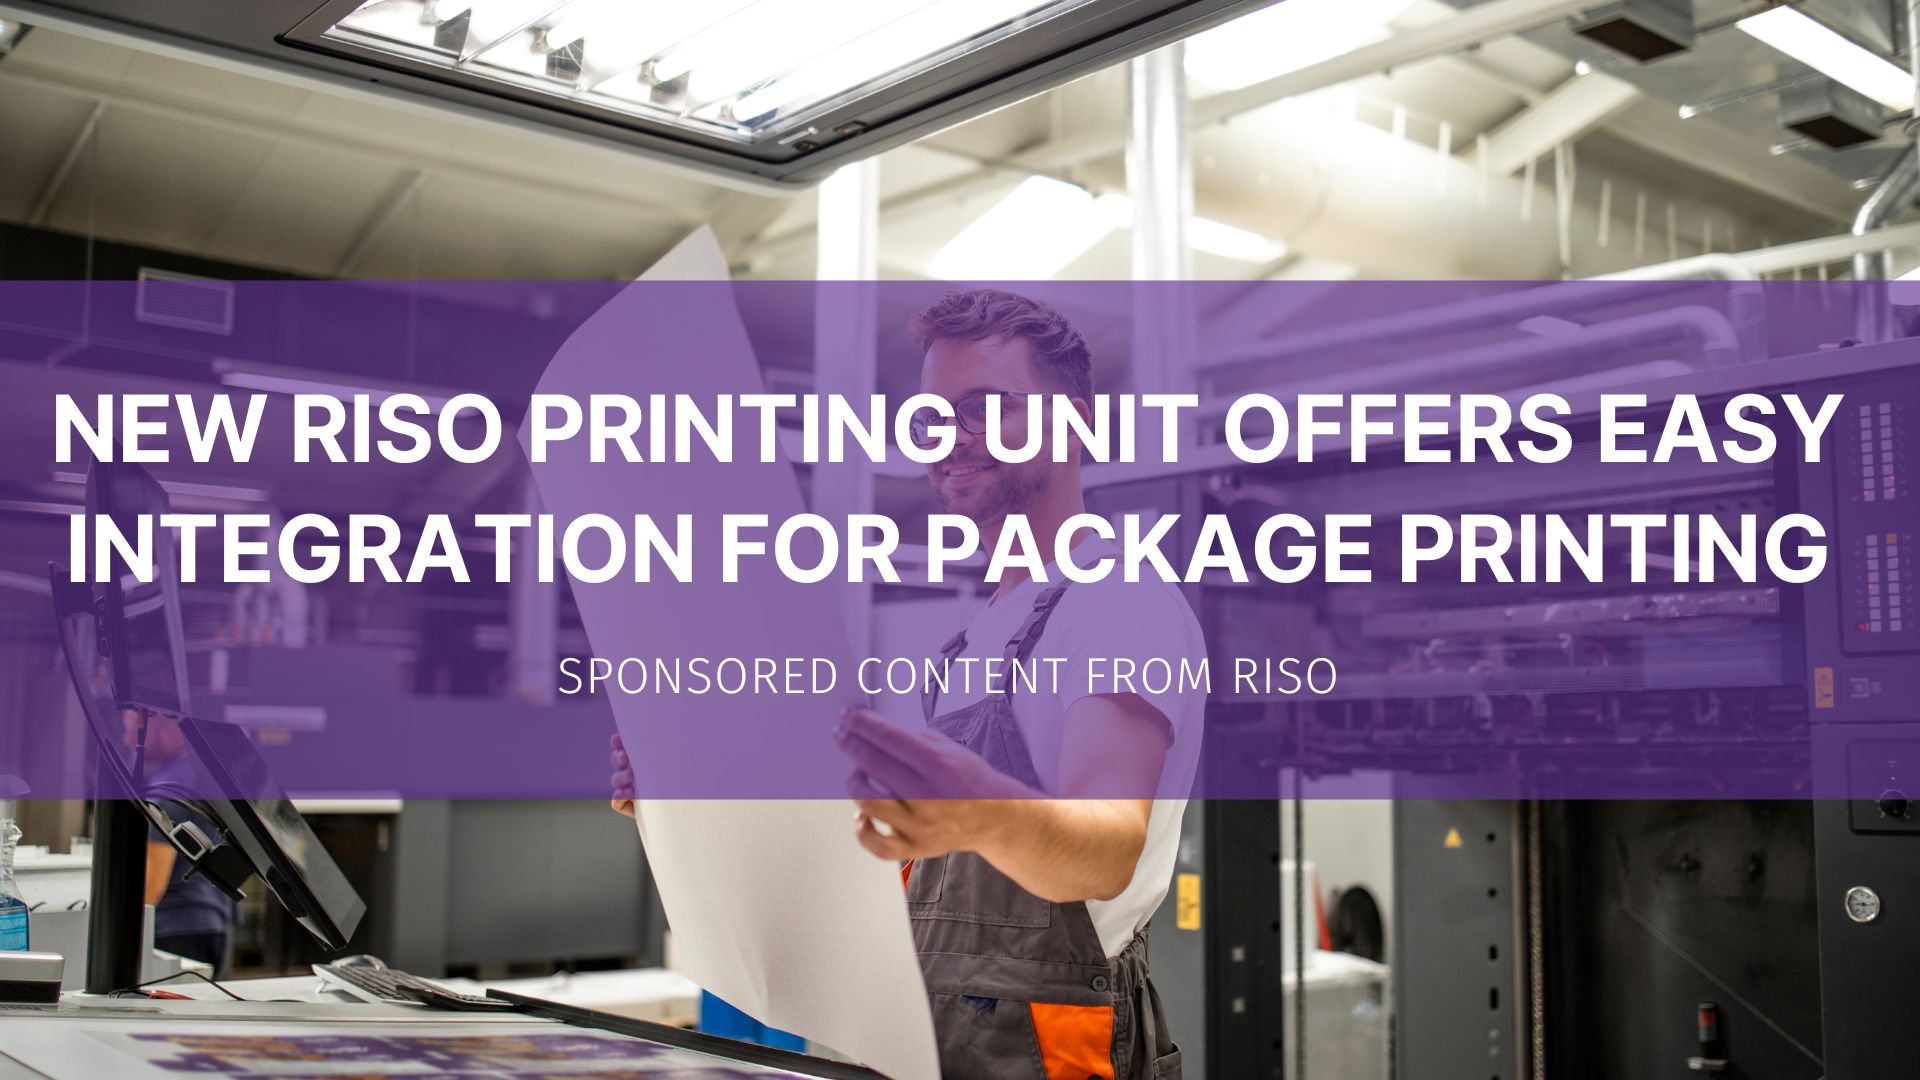 Featured image for “New RISO Printing Unit Offers Easy Integration for Package Printing”